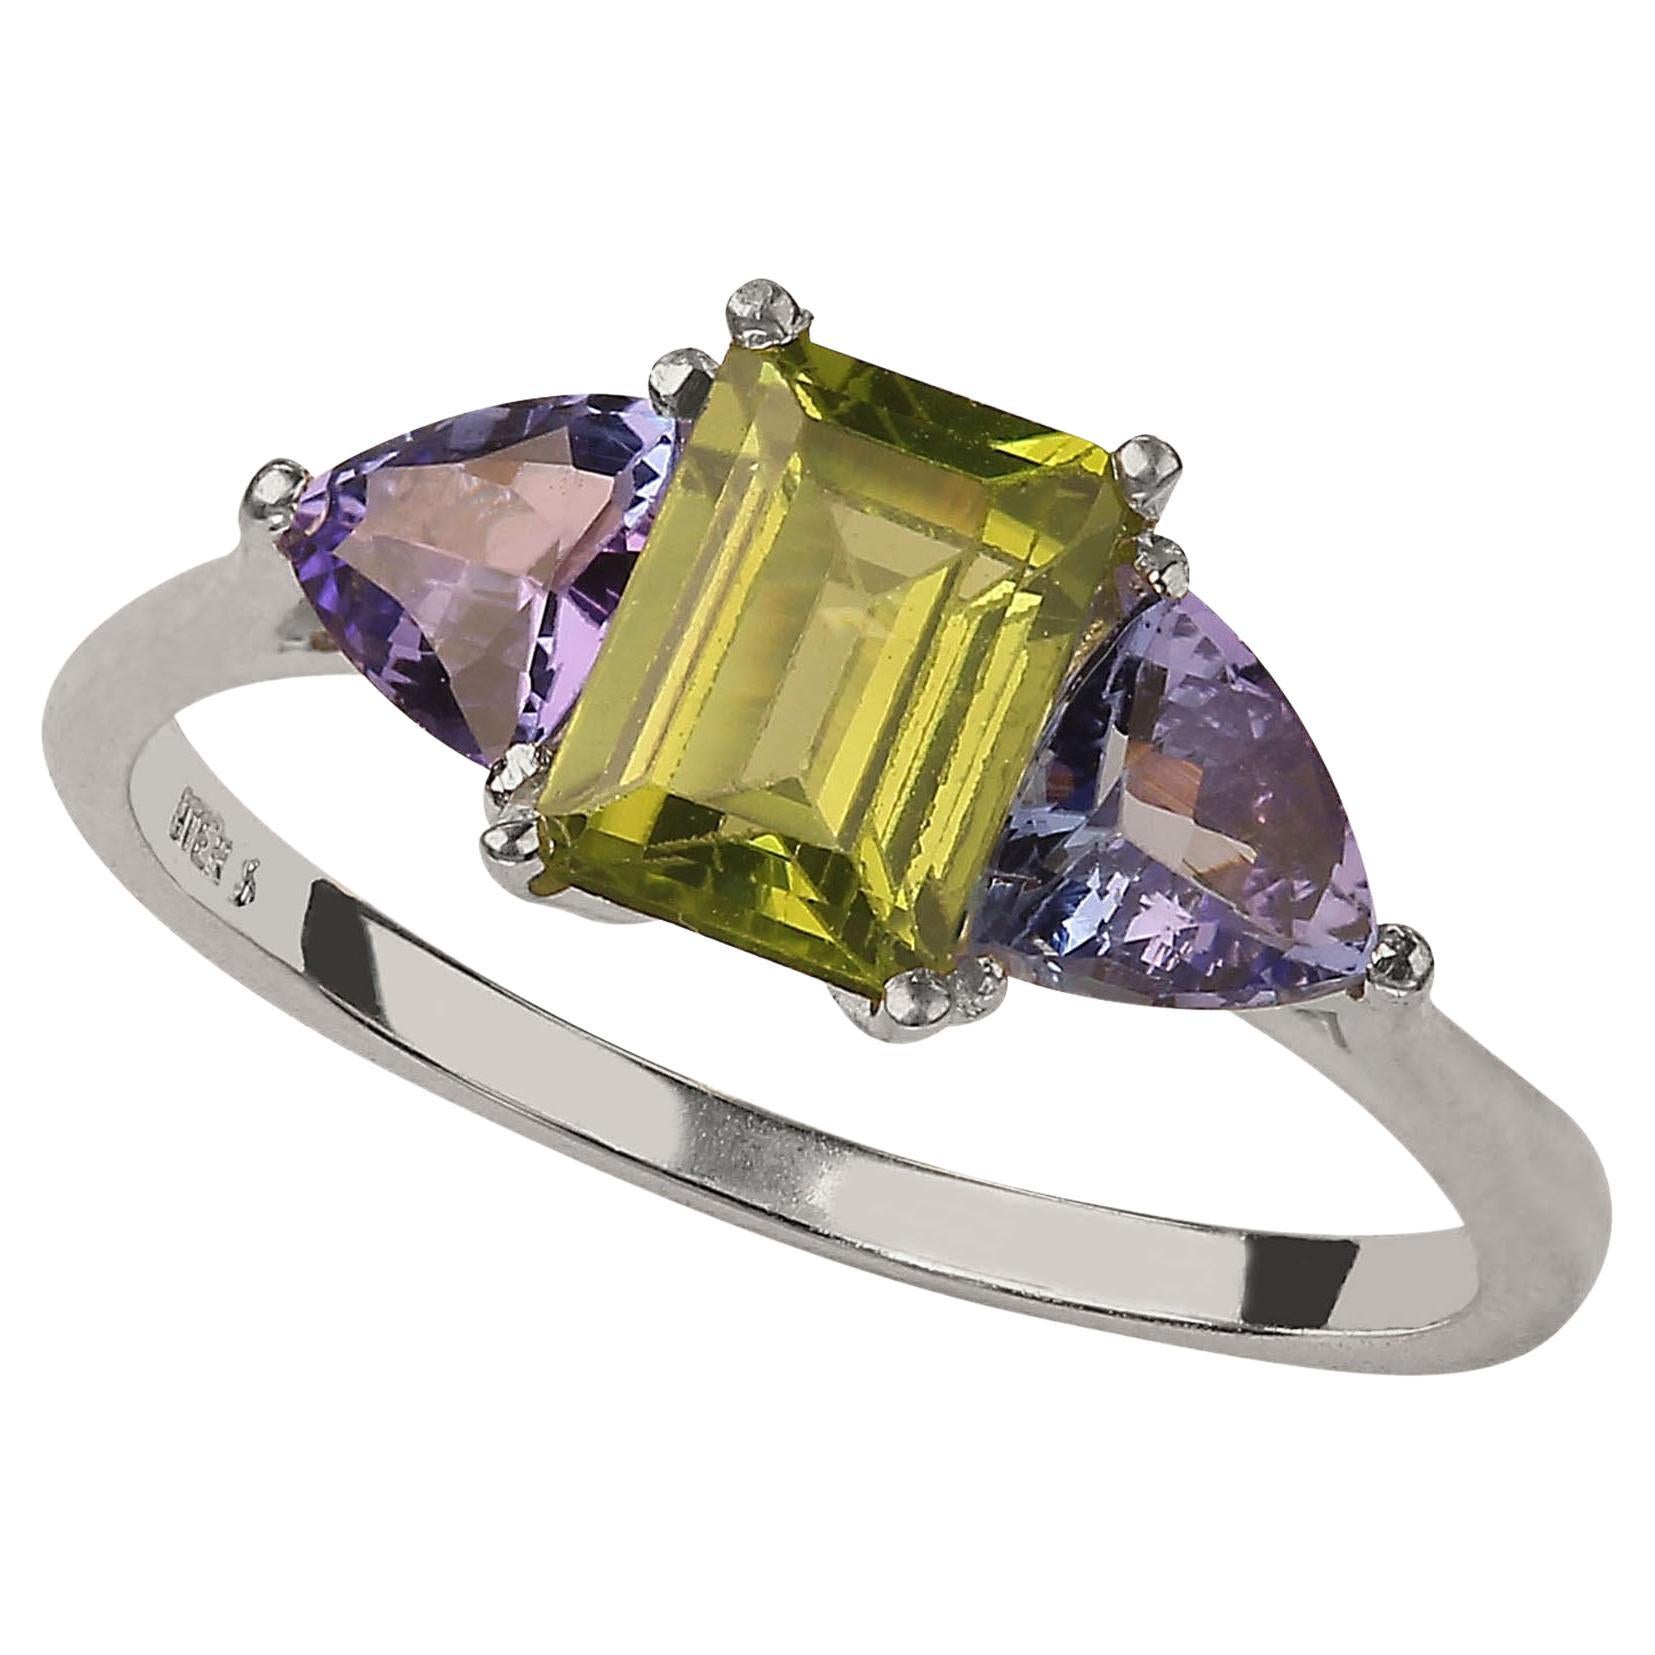 Delightful ring of emerald cut sparkling Peridot accented with triangles of glittering Tanzanites. Wear these gems with everything and enjoy how the green and purple works with your entire wardrobe.  The emerald cut Peridot is approximately 1.30